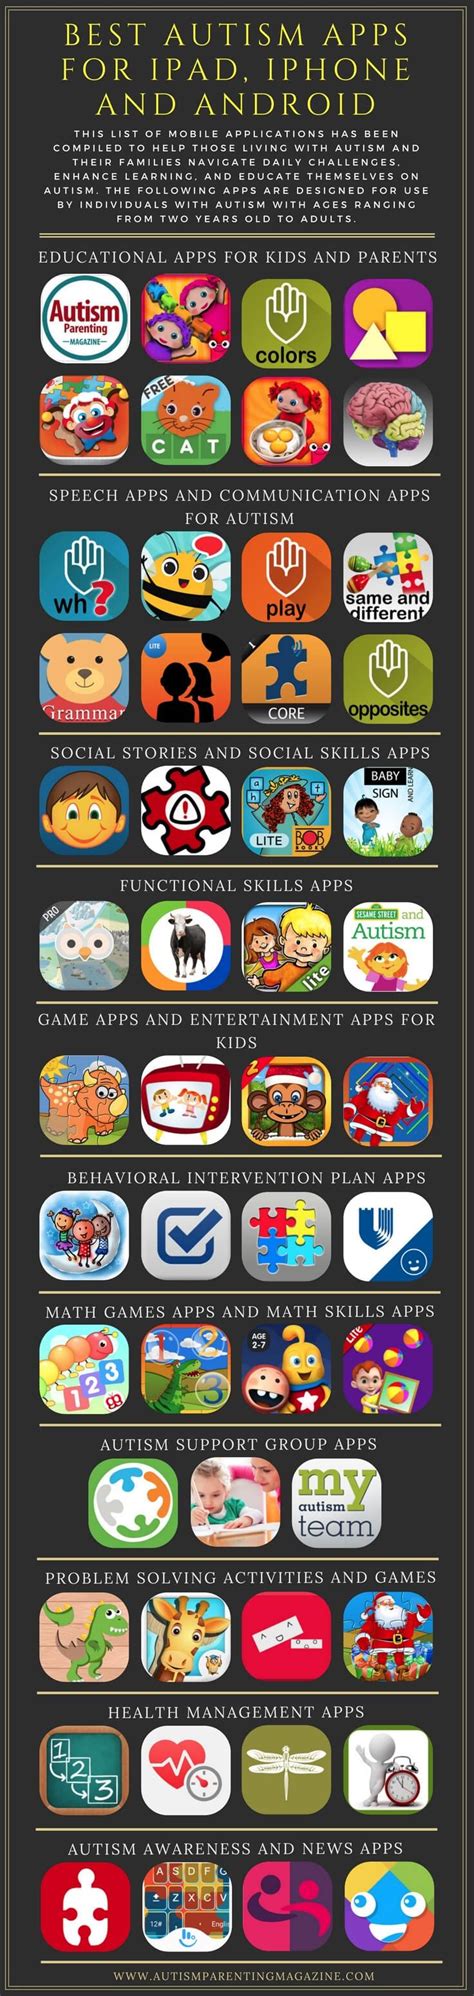 We break down the best teachers apps to give you a quick guide of the apps you need to 10 apps for teachers. Best Autism Apps For iPad, iPhone and Android - Ultimate Guide